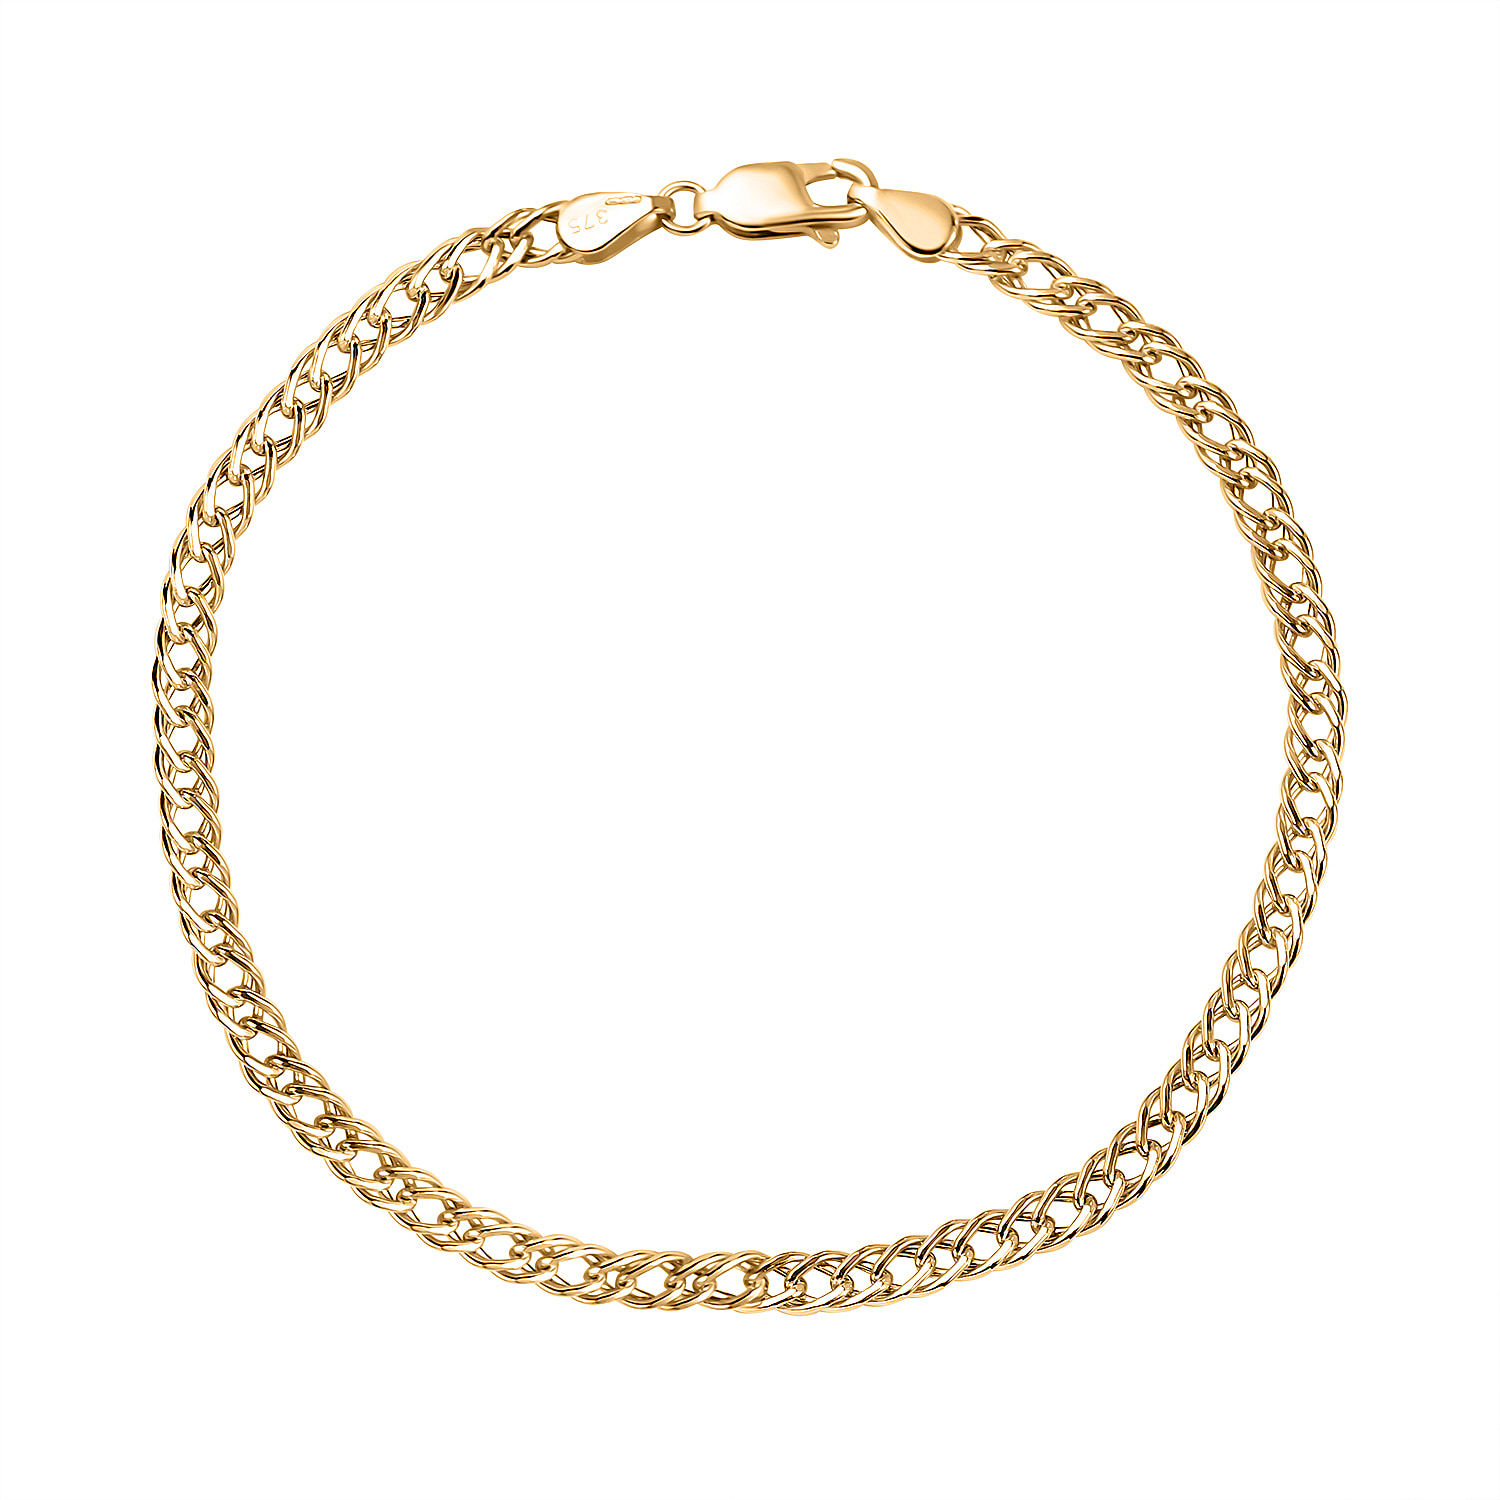 Maestro Collection - 9K Yellow Gold Double Curb Bracelet (Size - 7.5)